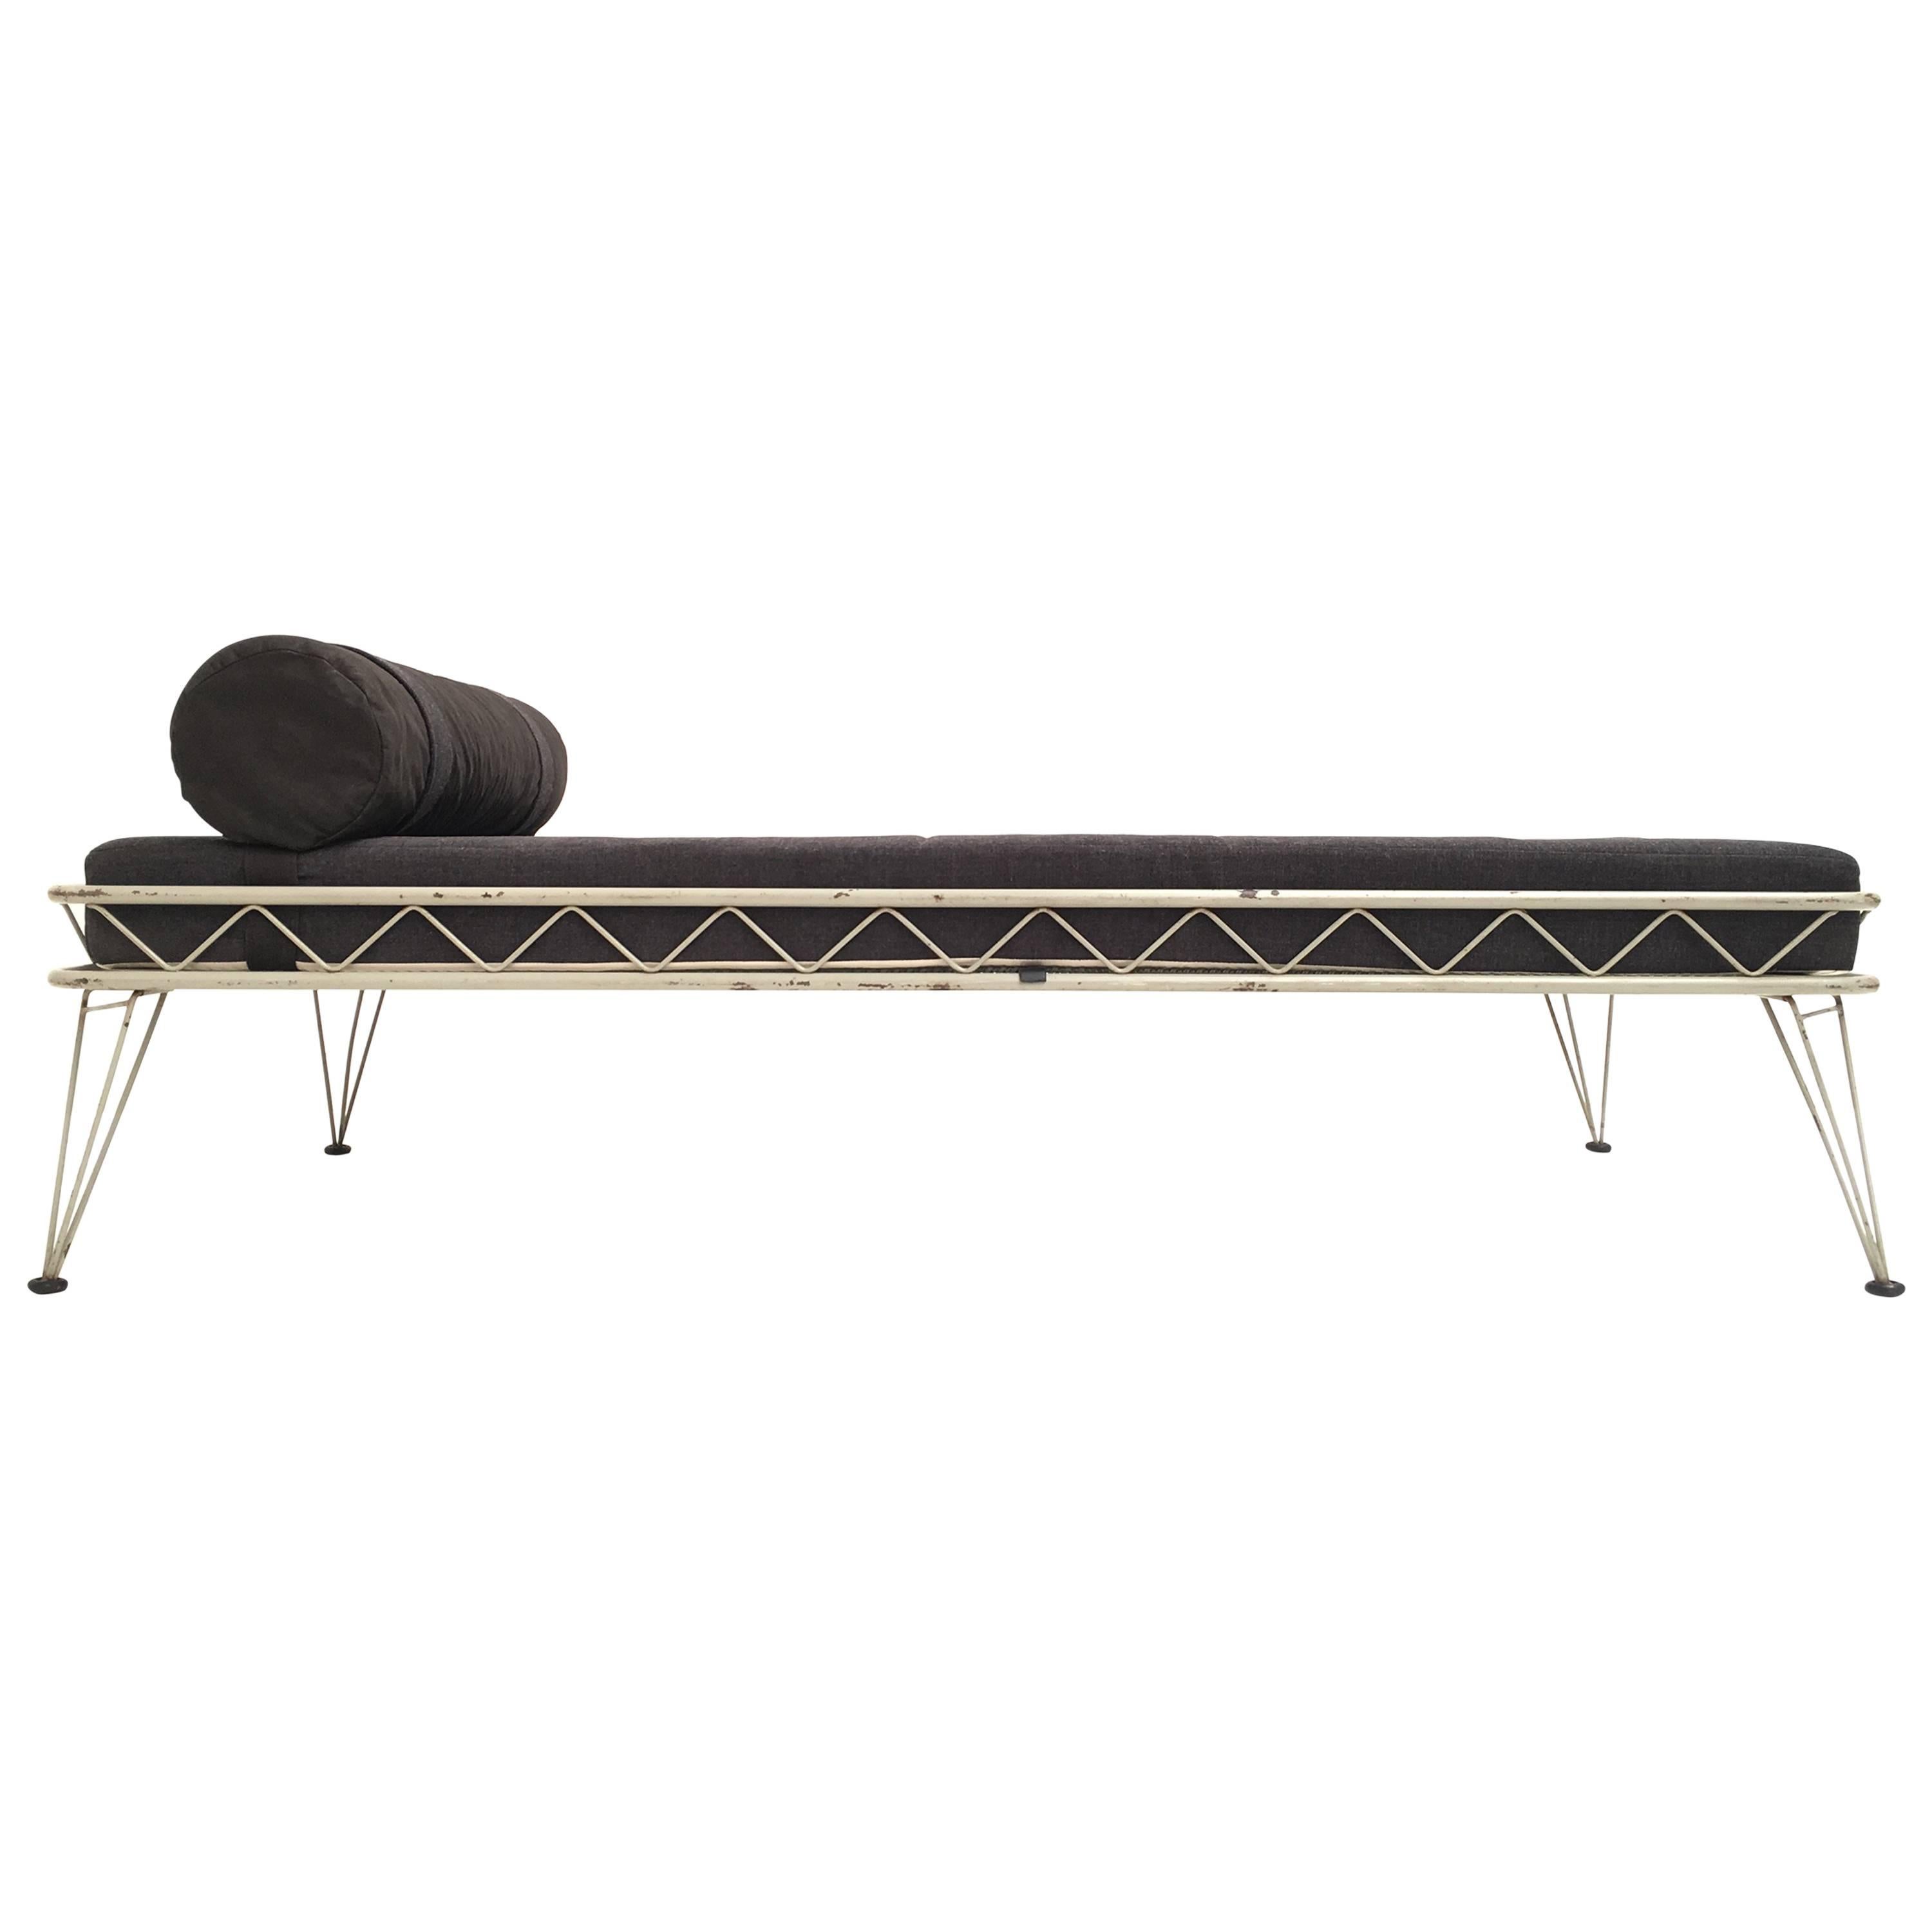 Daybed 'Arielle' by Dick Cordemeijer for Auping 1954, New Upholstery